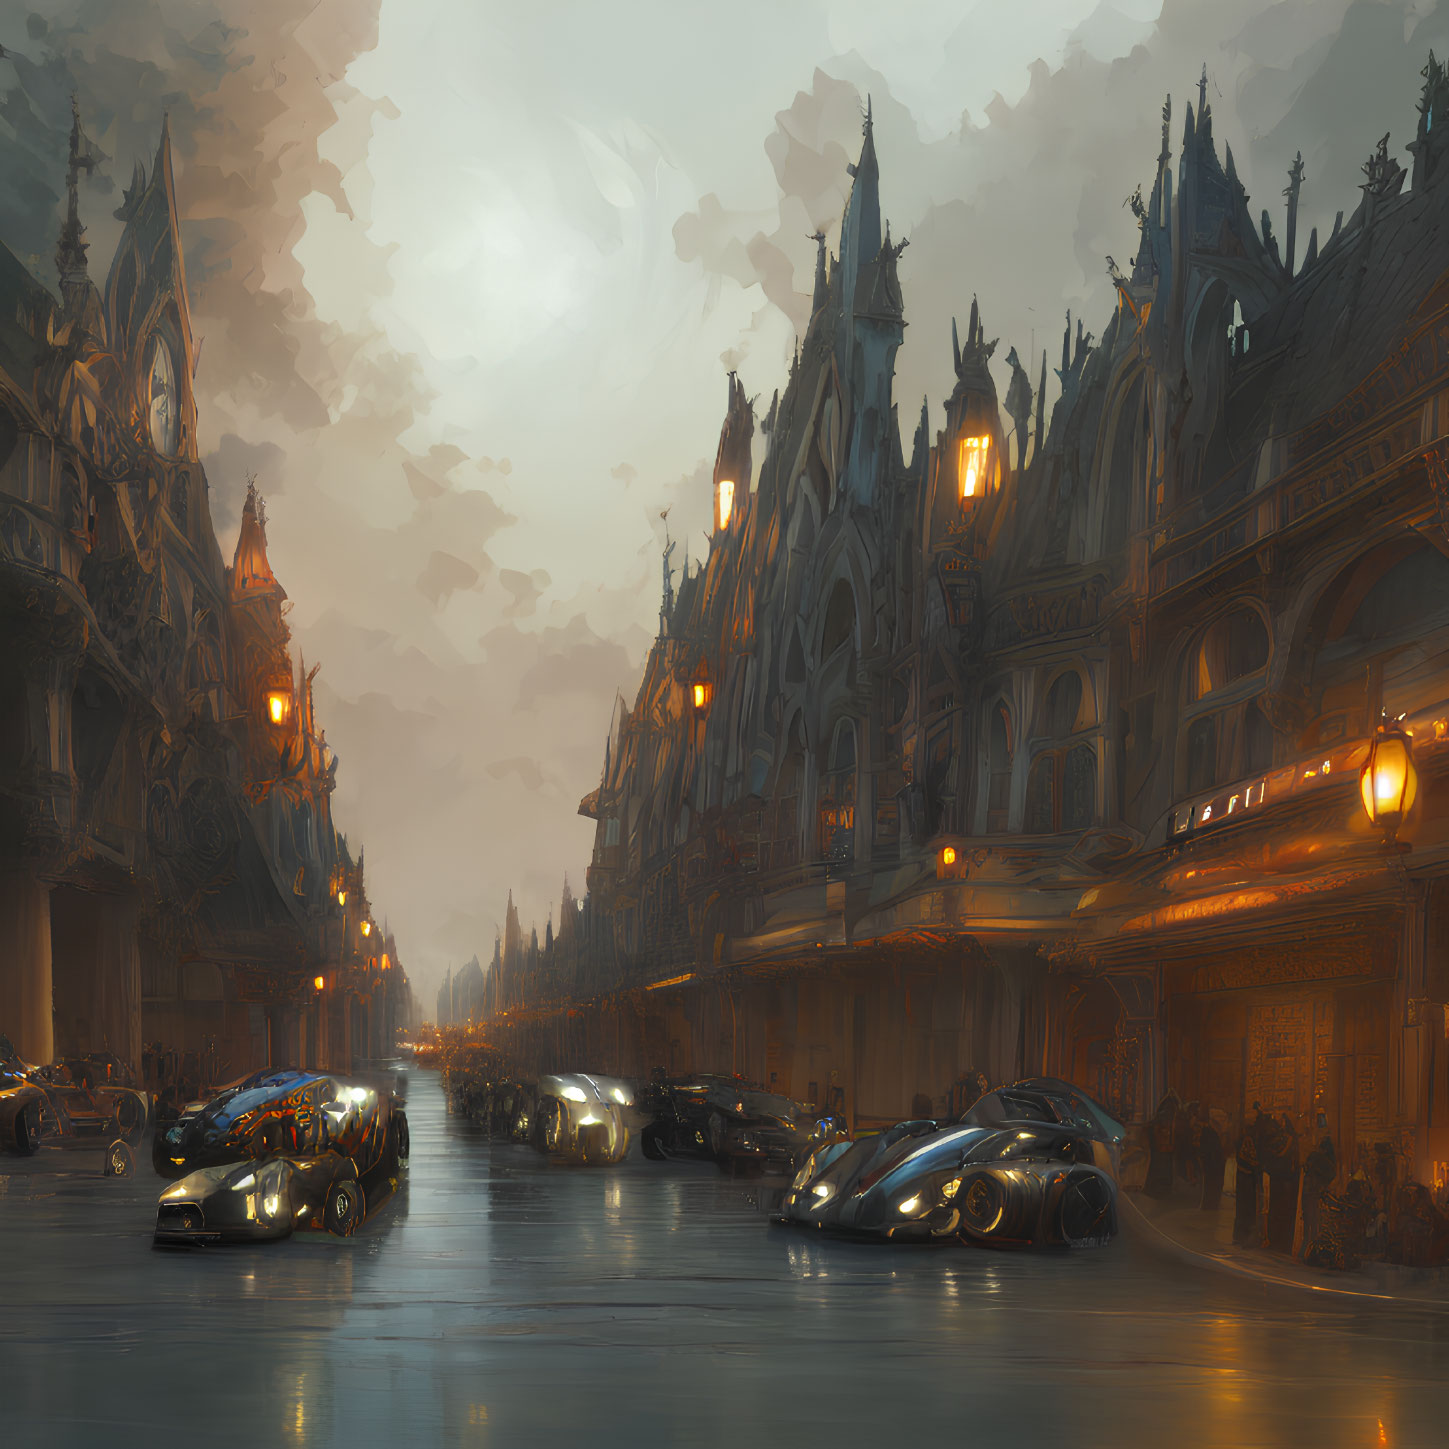 Futuristic city street at dusk with classic architecture and advanced vehicles